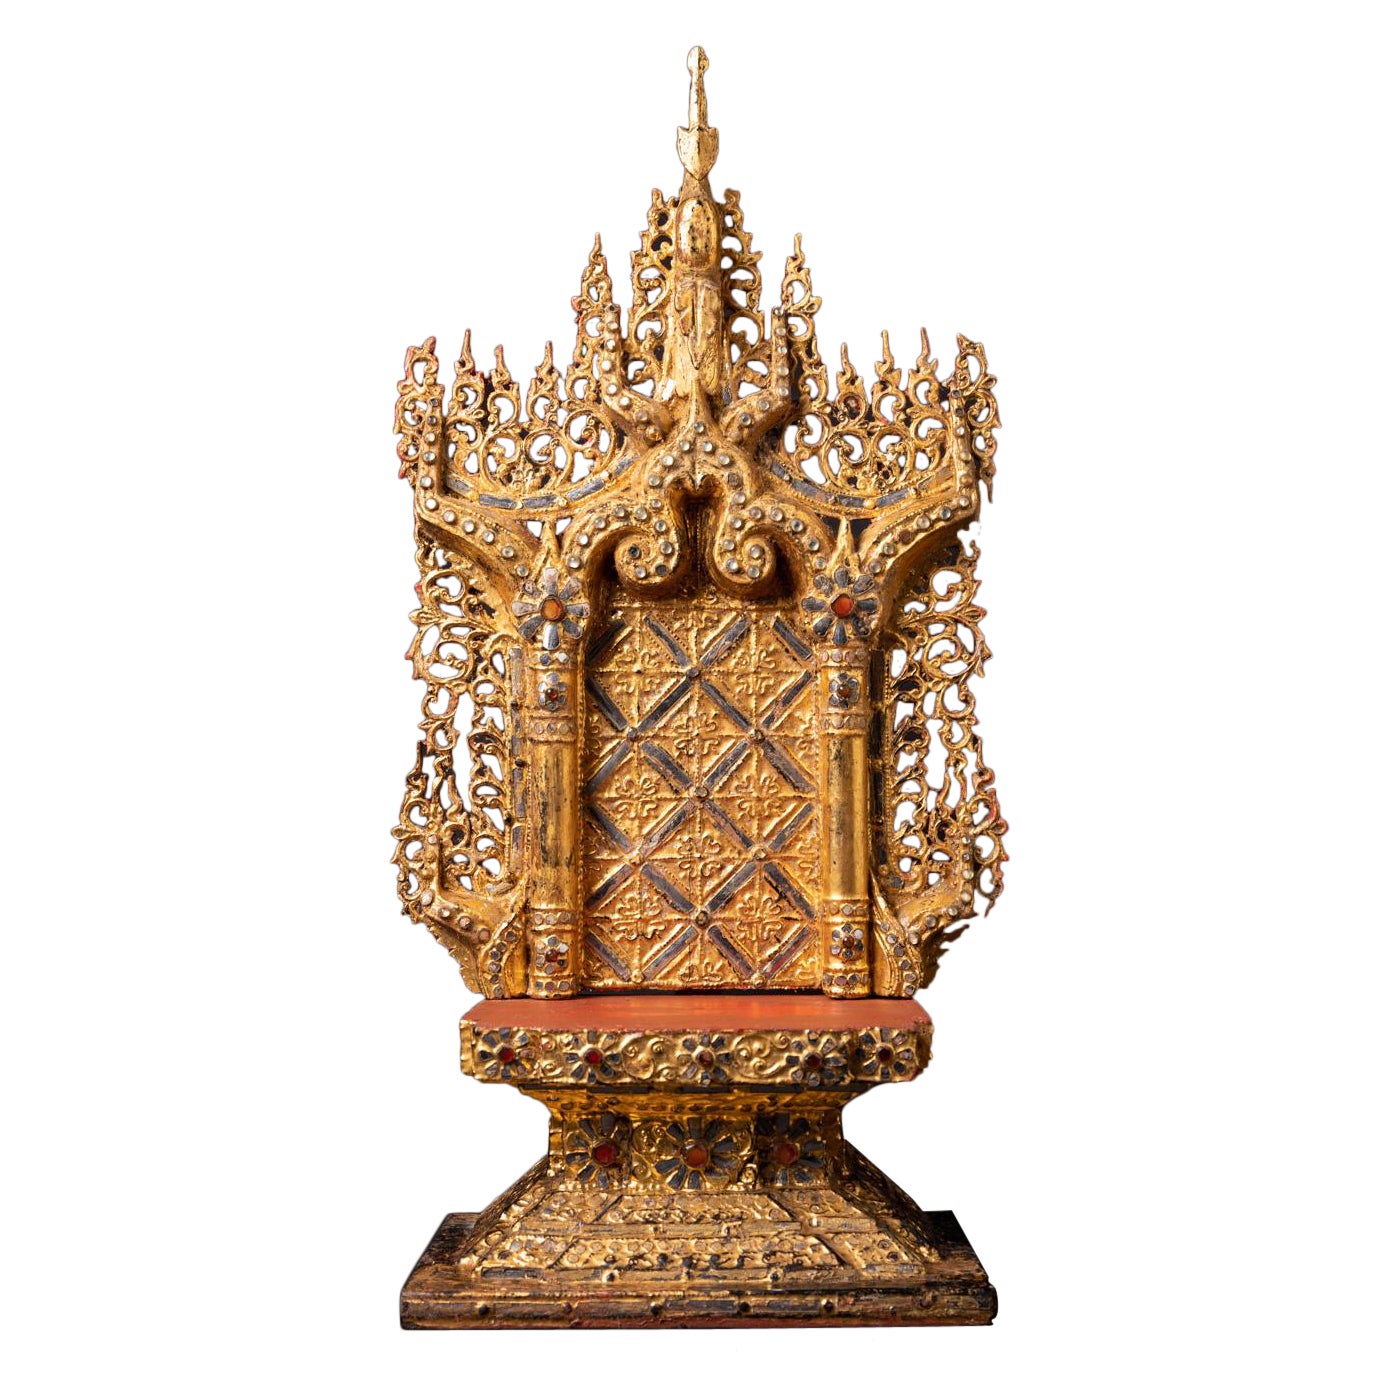 19th Century Masterpiece, Antique Wooden Burmese Throne in Mandalay Style For Sale